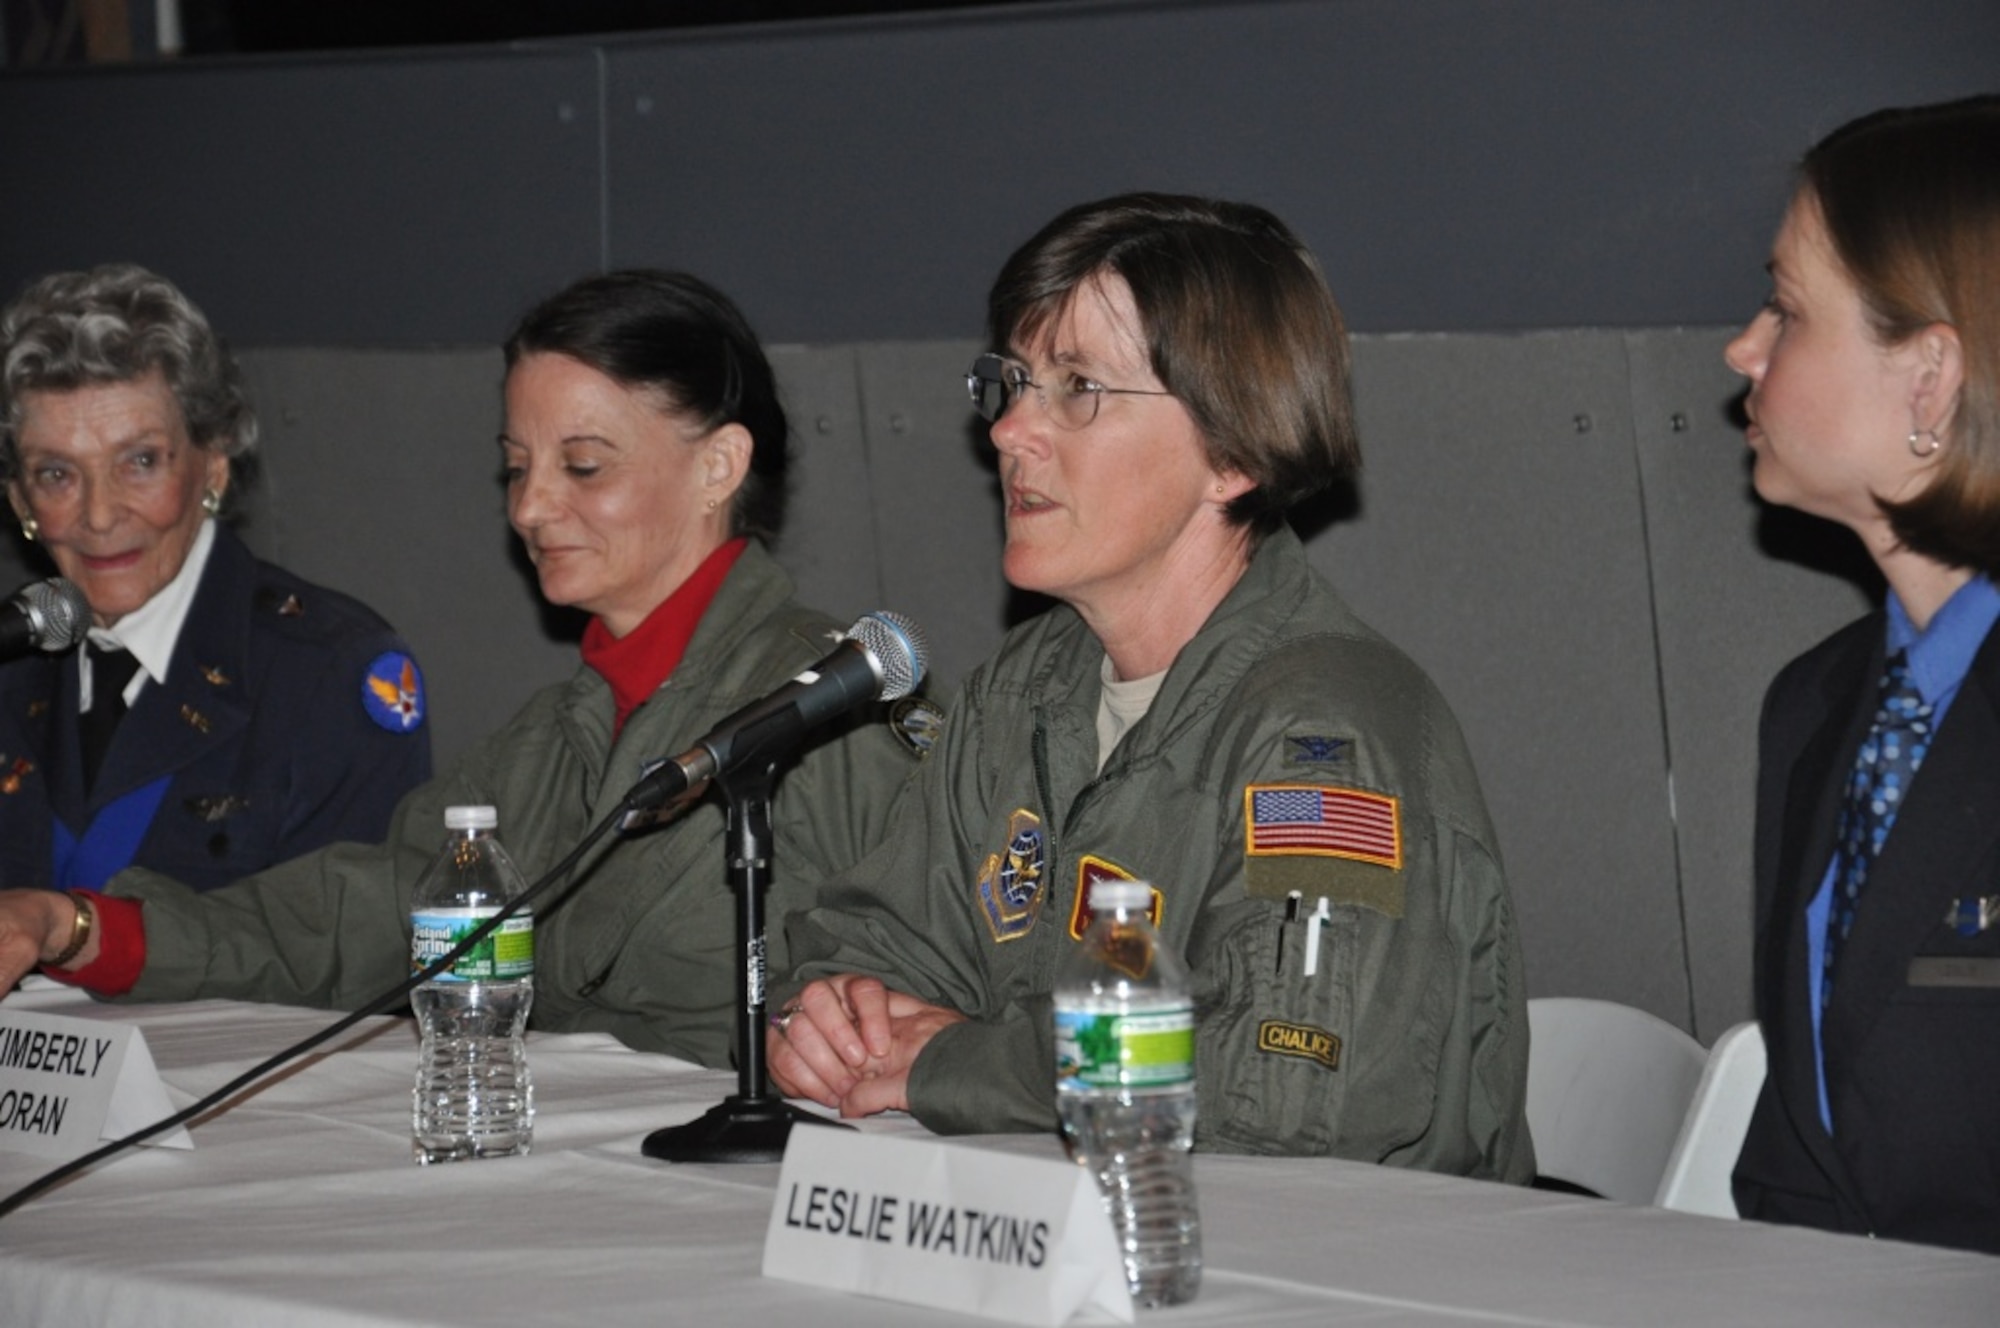 JOINT BASE McGUIRE-DIX-LAKEHURST, N.J. -- Col. Kimberly Corcoran, U.S. Air Force Expeditionary Center vice commander, talks to Girl Scout troops during a “Women Pilots” panel discussion at the Intrepid Sea, Air and Space museum in New York City, March 24. (From left to right) Bernice “Bee” Falk Haydu, a former Women Airforce Service Pilot during World War II; Rear Adm. Wendi Carpenter, president of the State College of New York Maritime College; and Leslie Watkins, commercial airline and instructor pilot for Jet Blue; were also panel members for the event hosted in honor of Women’s History Month. (U.S. Air Force photo by 1st Lt. Sybil Taunton, U.S. Air Force Expeditionary Center public affairs)